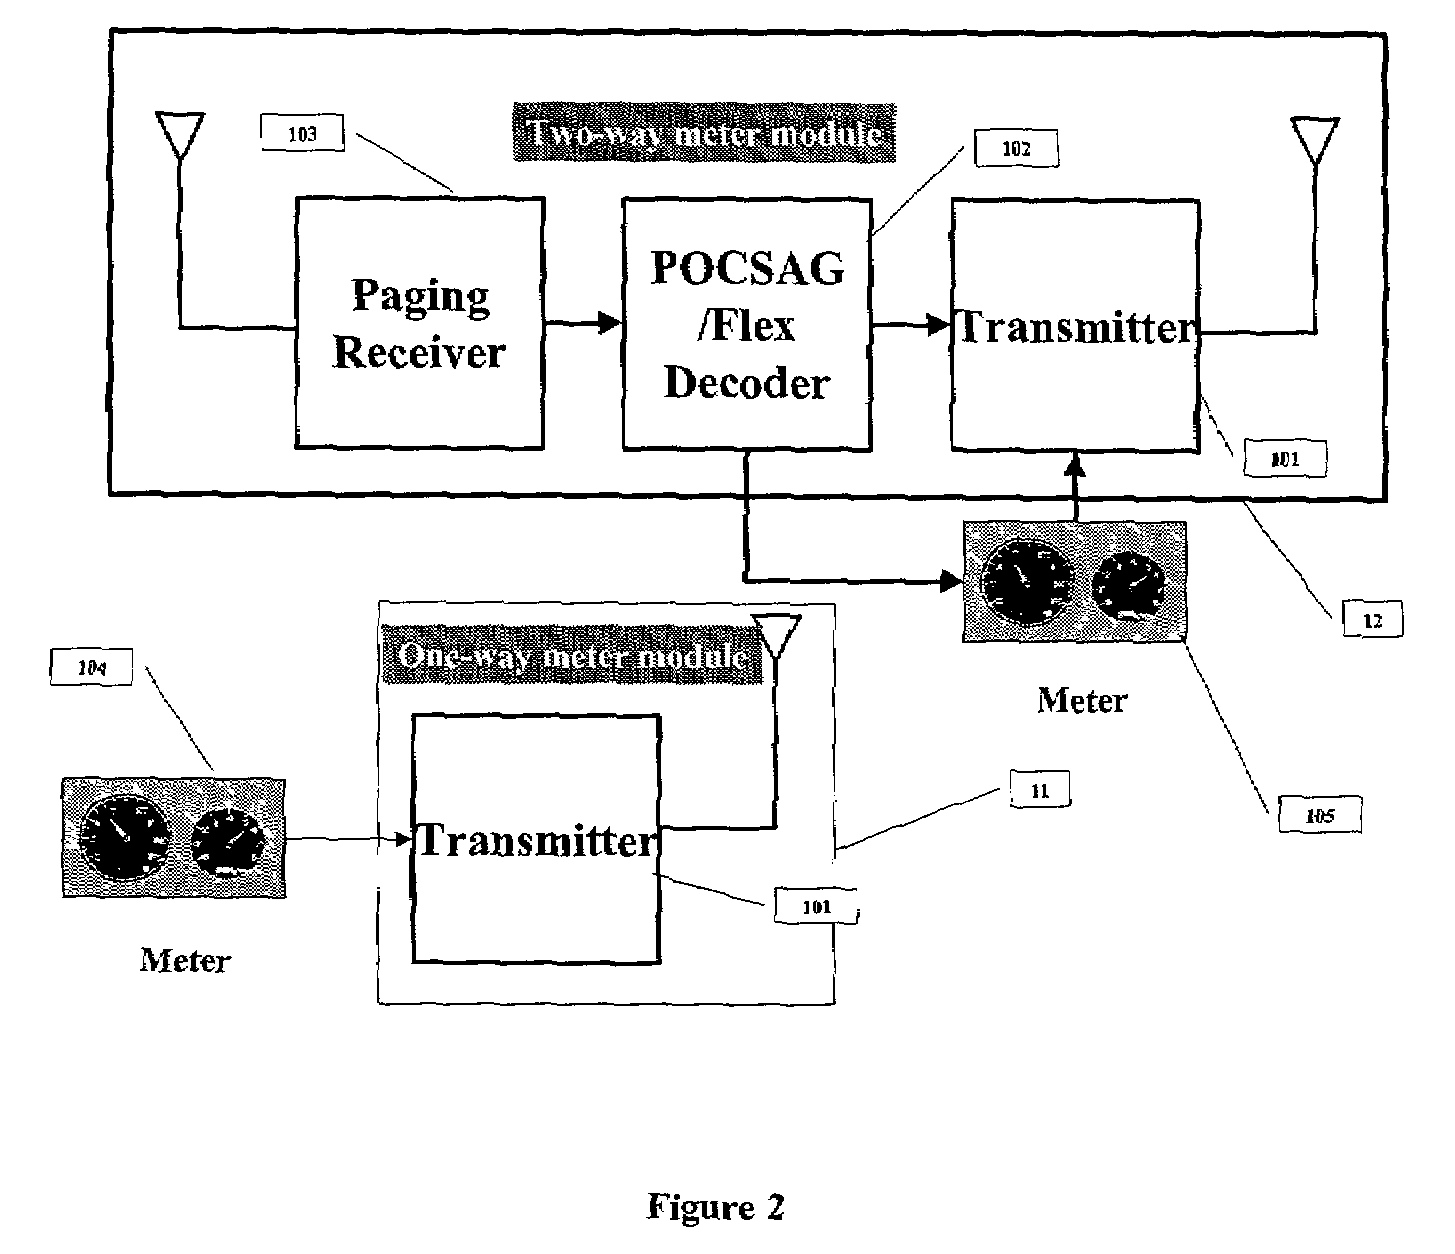 Modular wireless fixed network for wide-area metering data collection and meter module apparatus